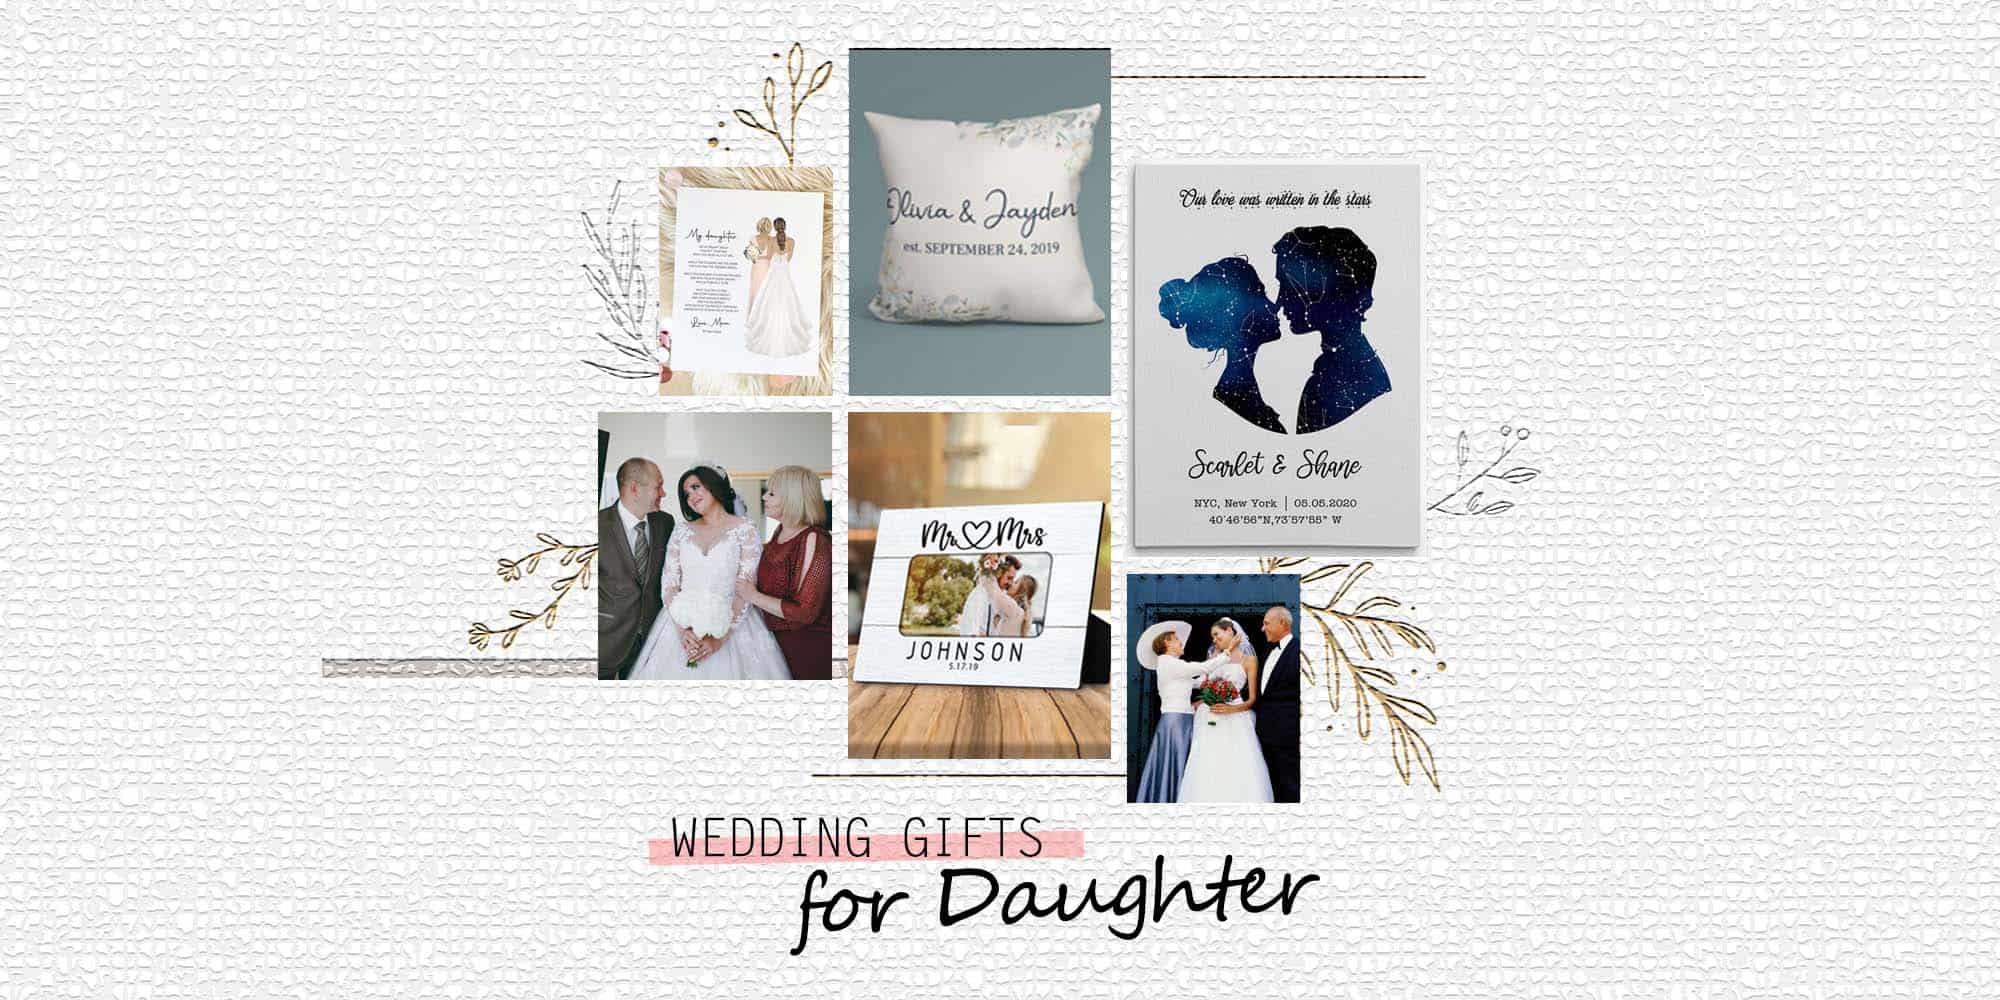 33 Sweet Gifts for Daughter on Her Wedding Day from Parents 2022 (+ 4 FAQs)